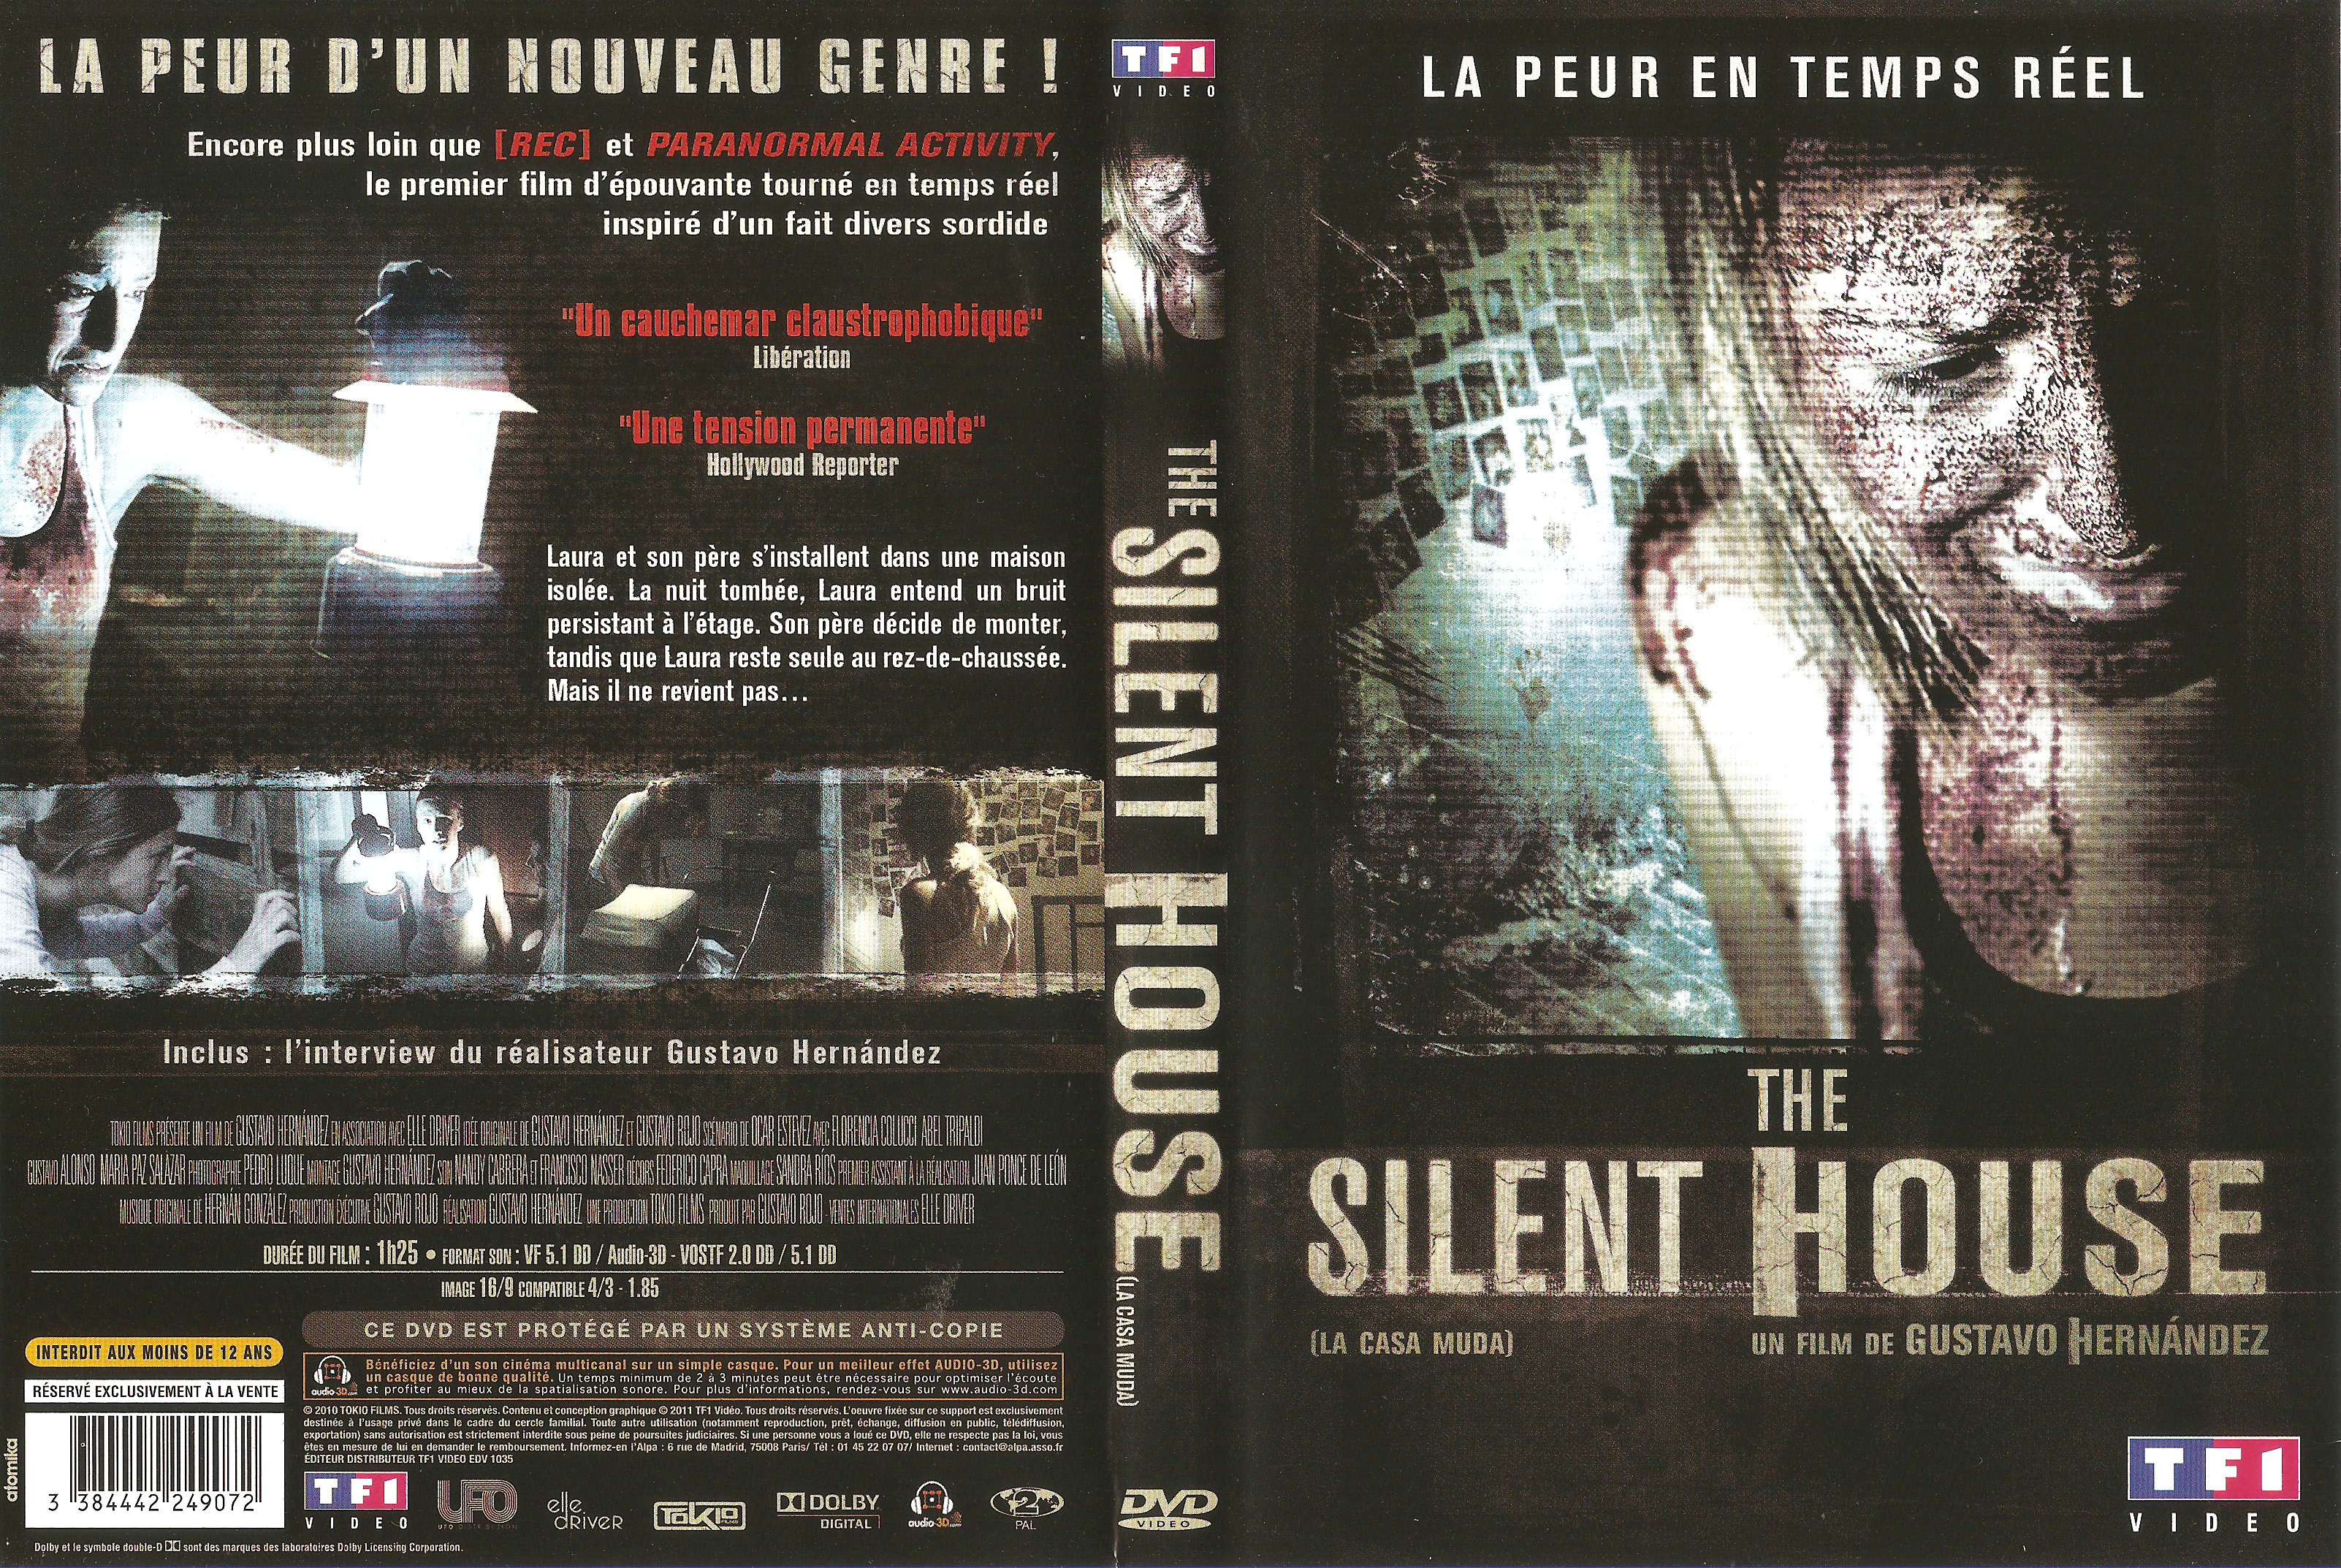 Jaquette DVD The Silent House